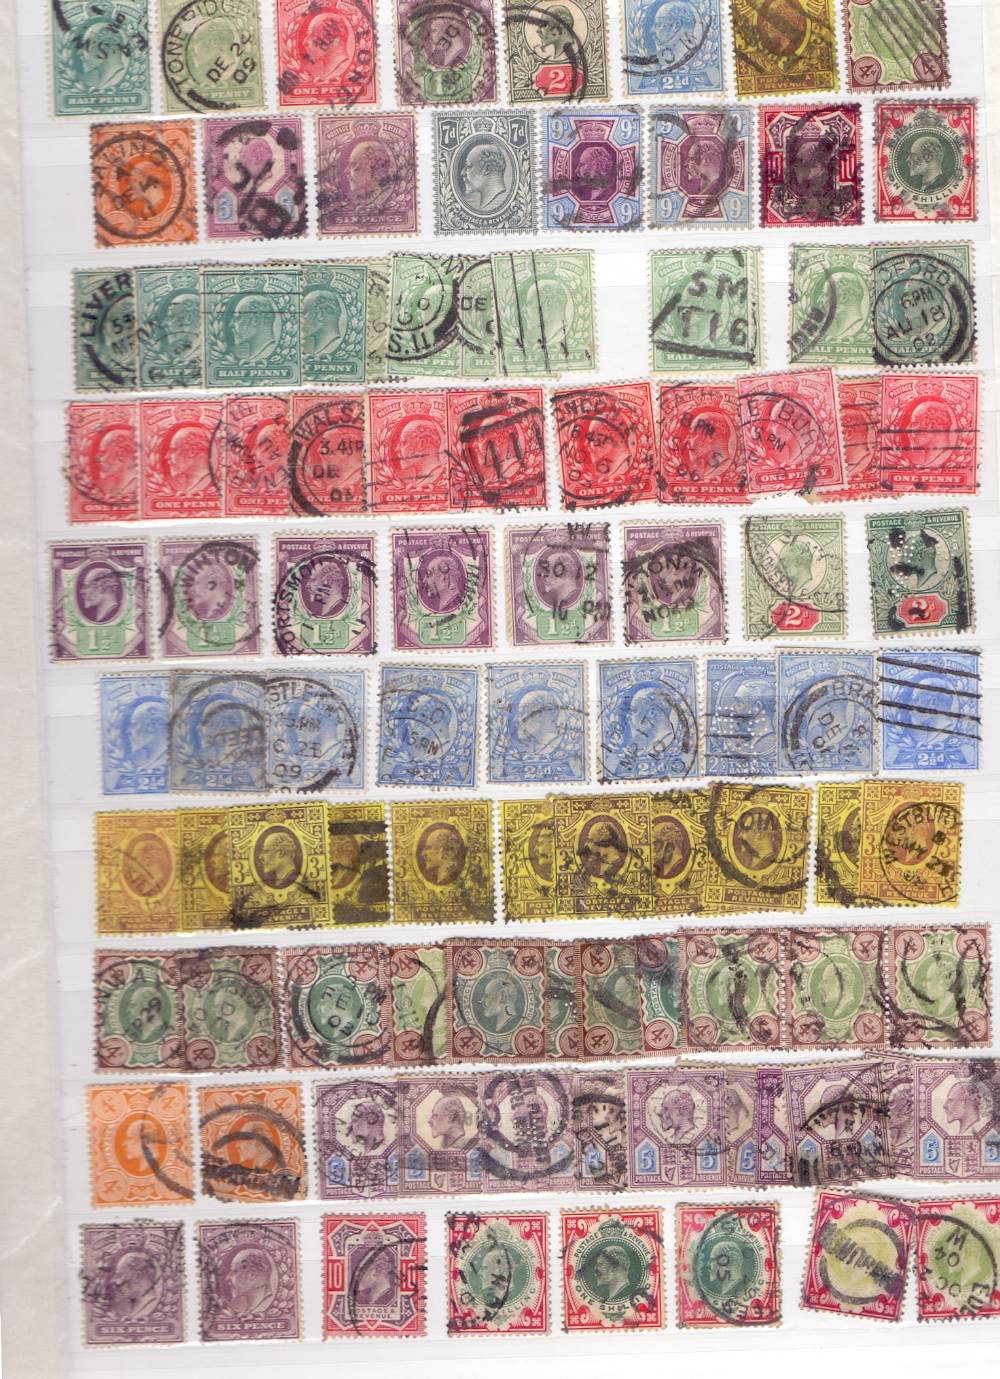 GREAT BRITAIN STAMPS : Accumulation in green stock book including Penny Black, - Image 4 of 6